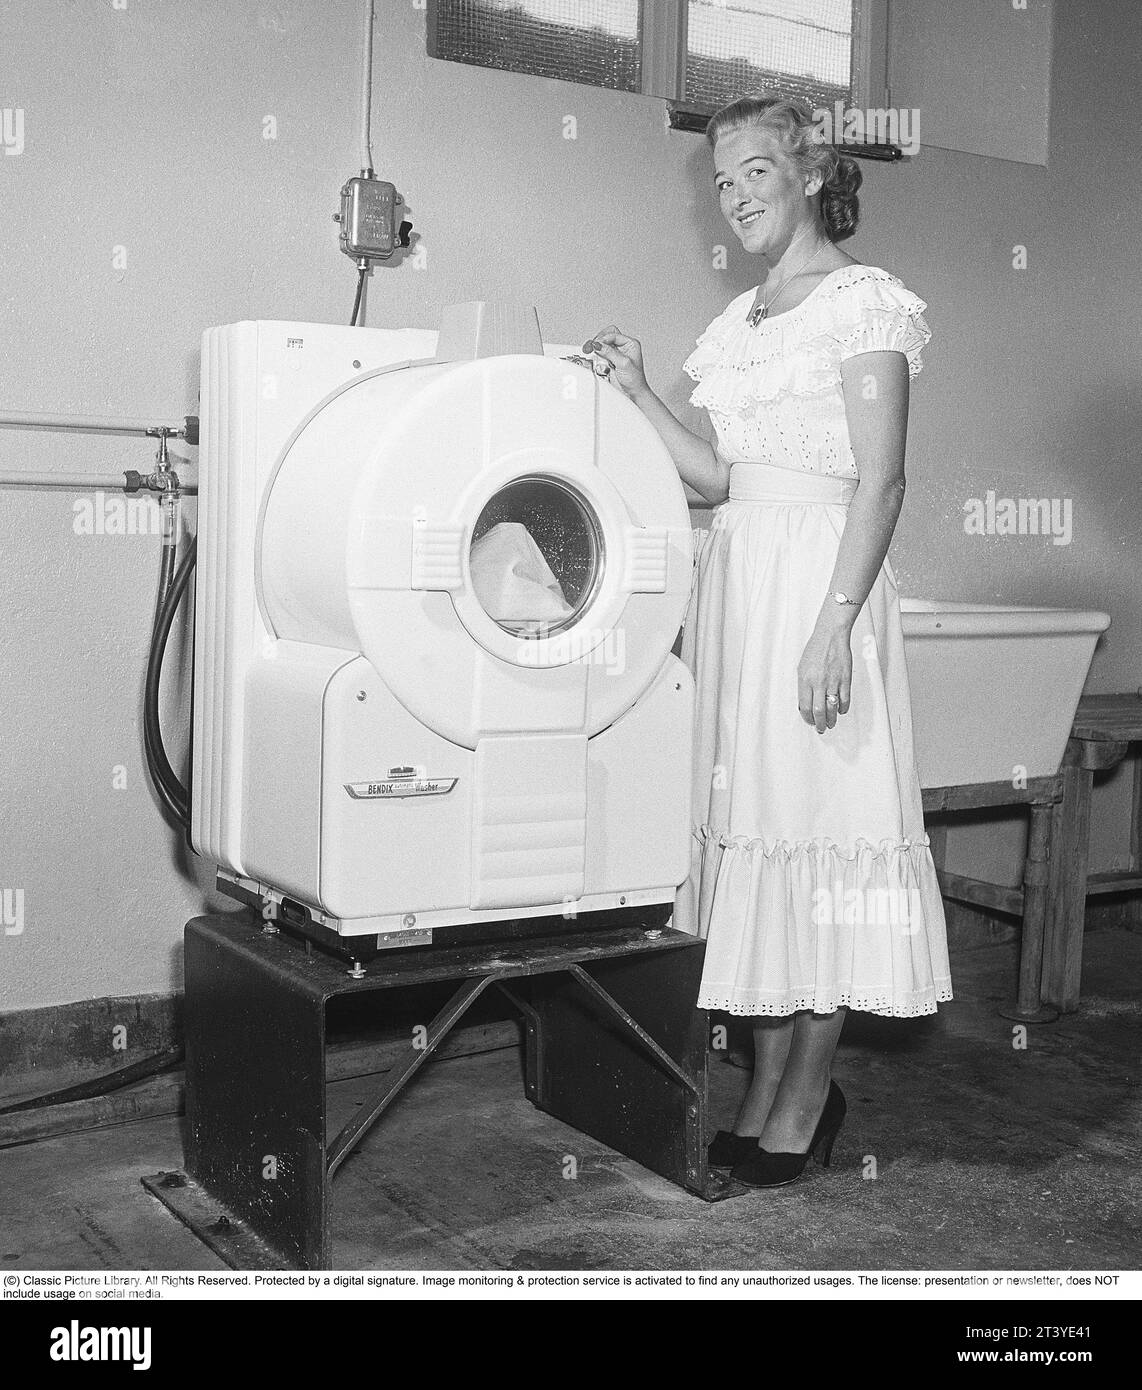 In the 1950s. A young woman at a state-of-the-art American washing machine from the manufacturer Bendix. The model was the first automatic washing machine and was not unlike today's washing machines. Sweden 1950. Kristoffersson ref AZ78-8 Stock Photo